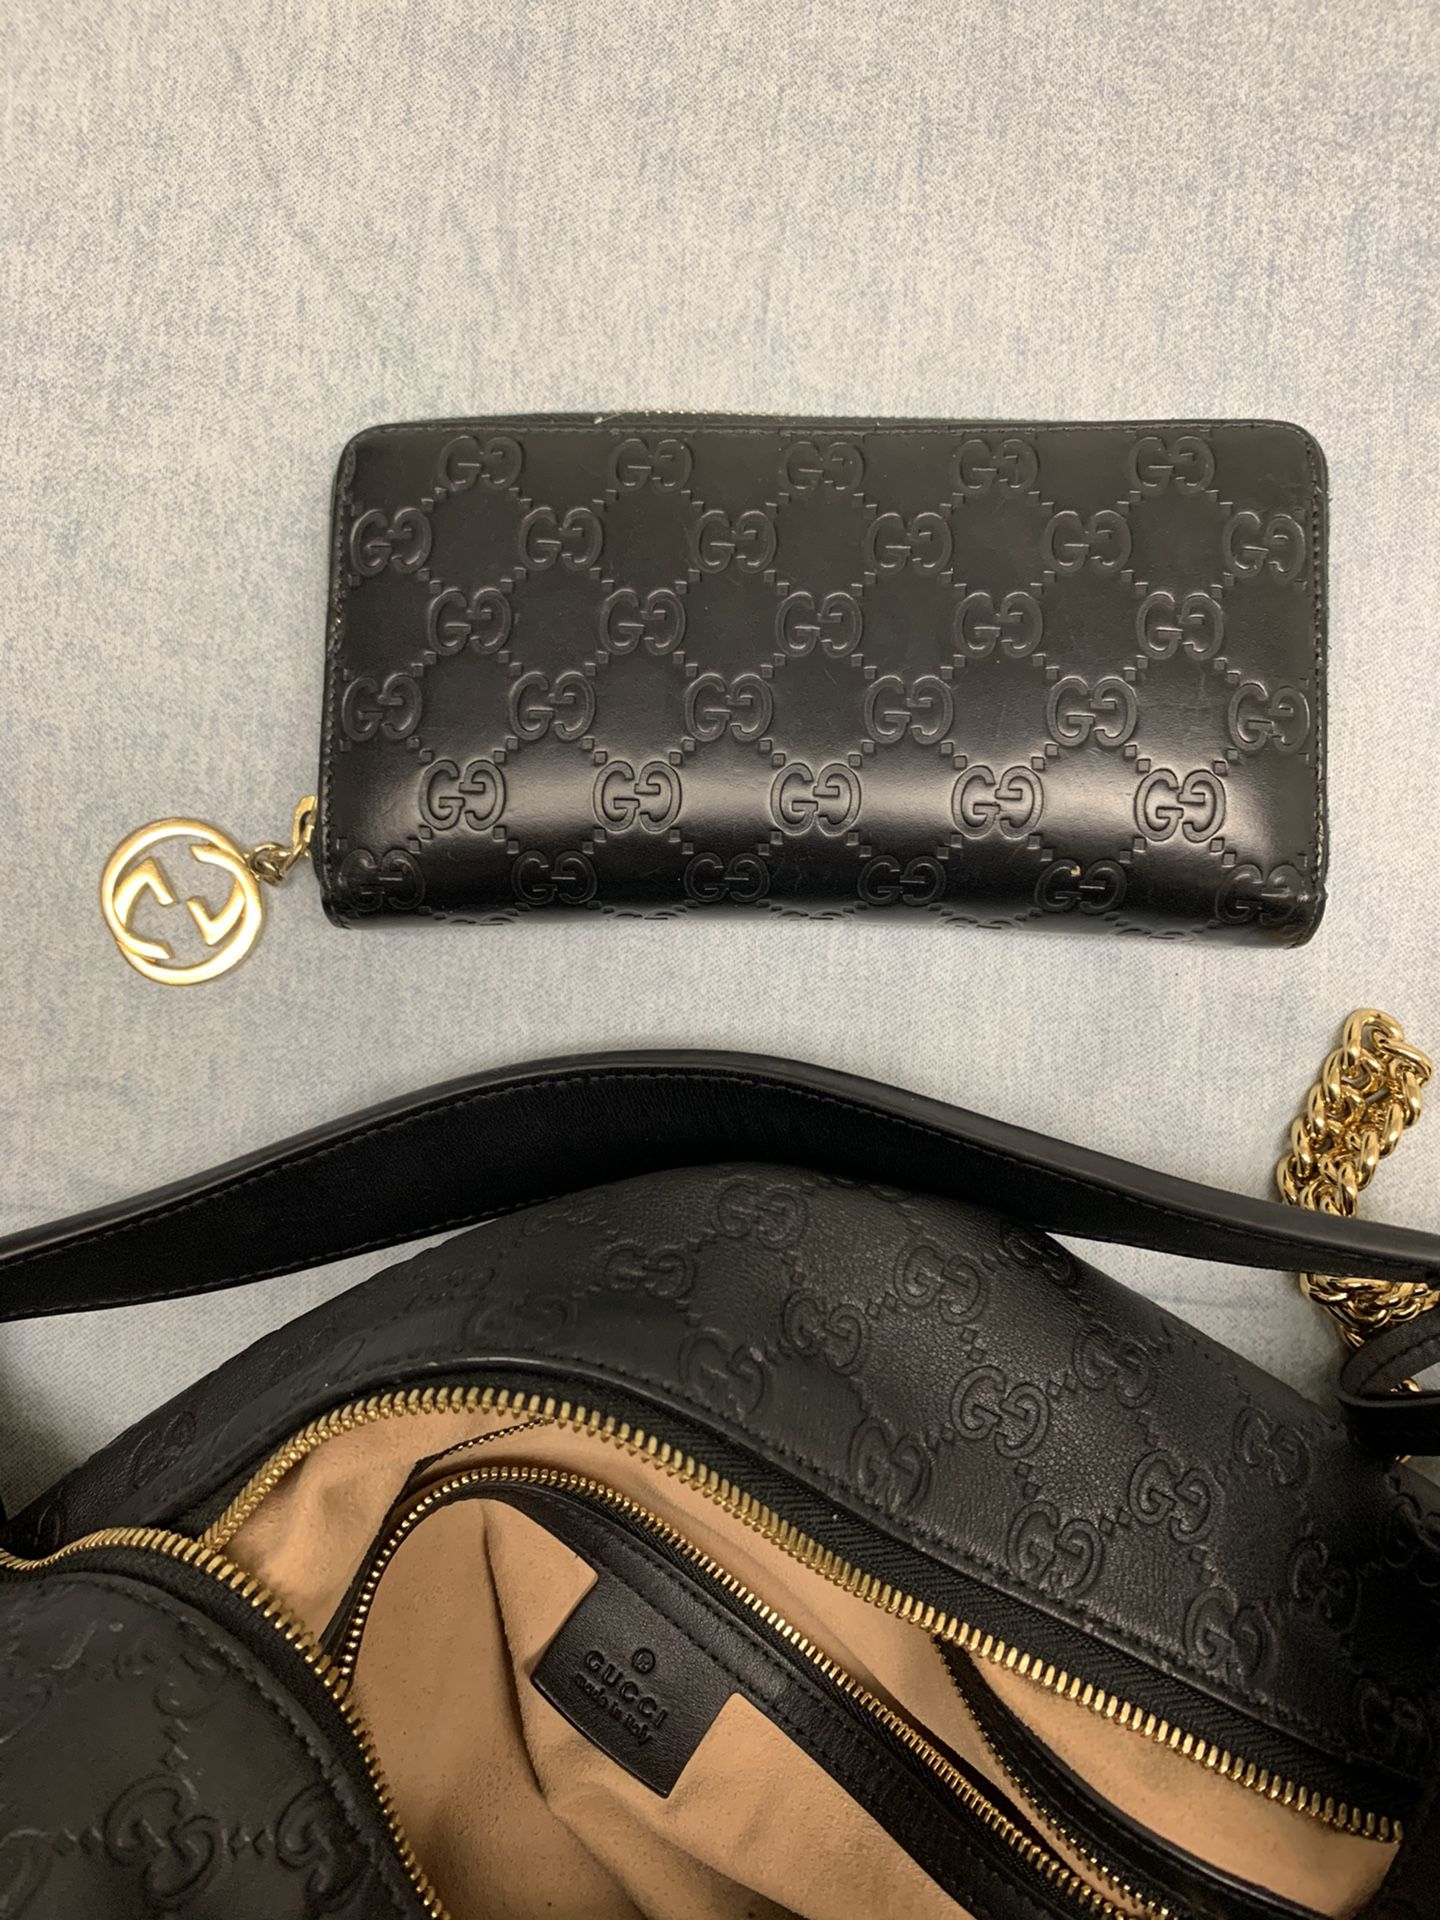 Gucci bag+wallet combo only,receipt shown! $300 firm